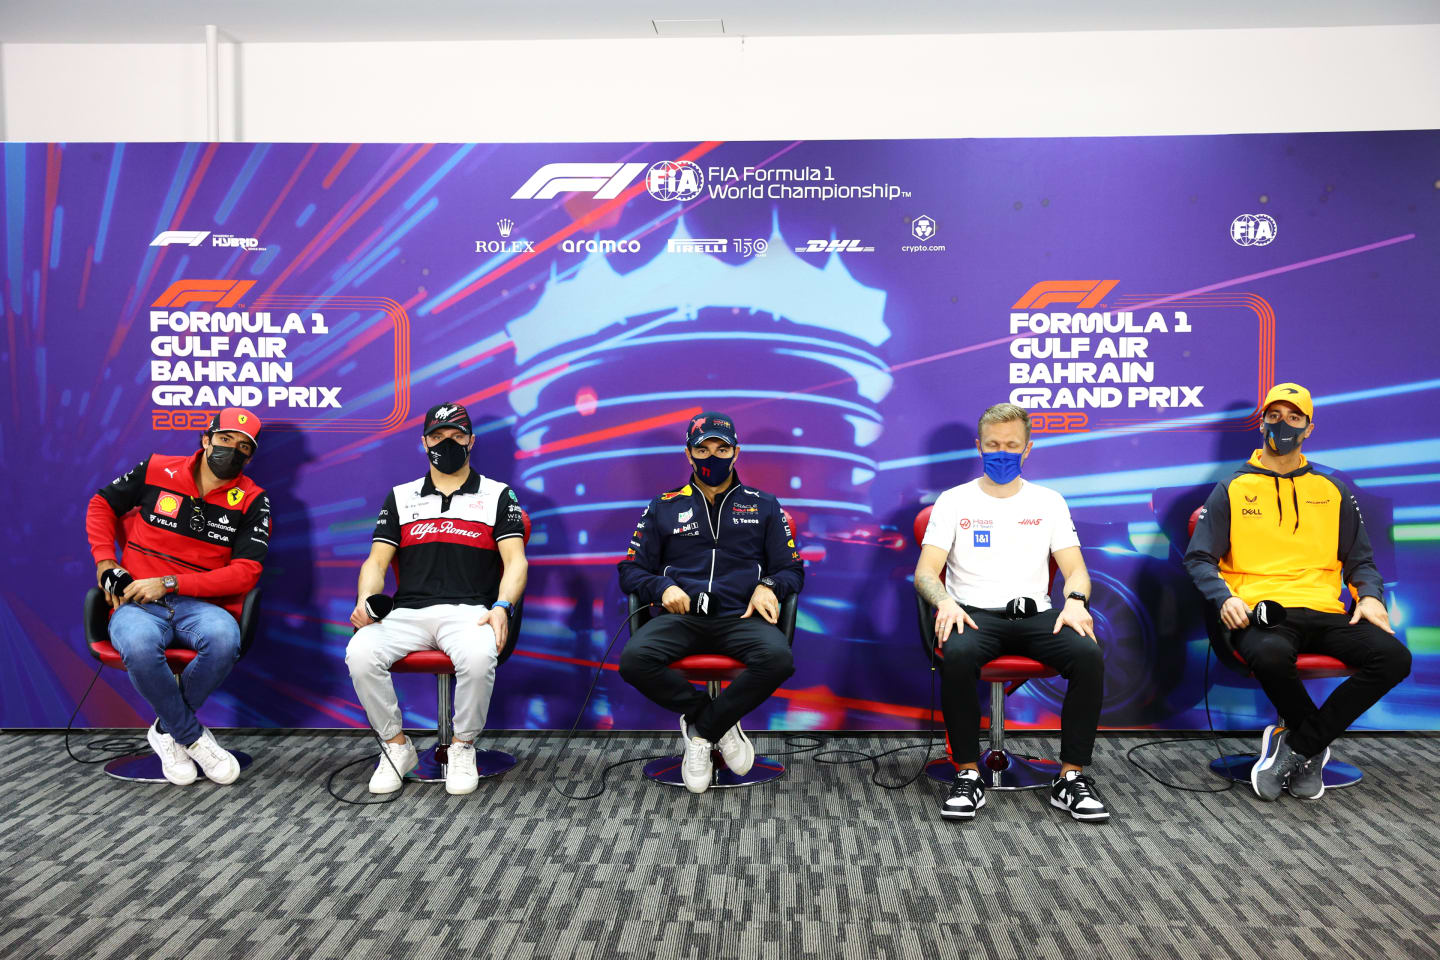 BAHRAIN, BAHRAIN - MARCH 18: (L-R) Carlos Sainz of Spain and Ferrari, Valtteri Bottas of Finland and Alfa Romeo F1, Sergio Perez of Mexico and Oracle Red Bull Racing, Kevin Magnussen of Denmark and Haas F1 and Daniel Ricciardo of Australia and McLaren attend the Drivers Press Conference before practice ahead of the F1 Grand Prix of Bahrain at Bahrain International Circuit on March 18, 2022 in Bahrain, Bahrain. (Photo by Clive Rose/Getty Images)